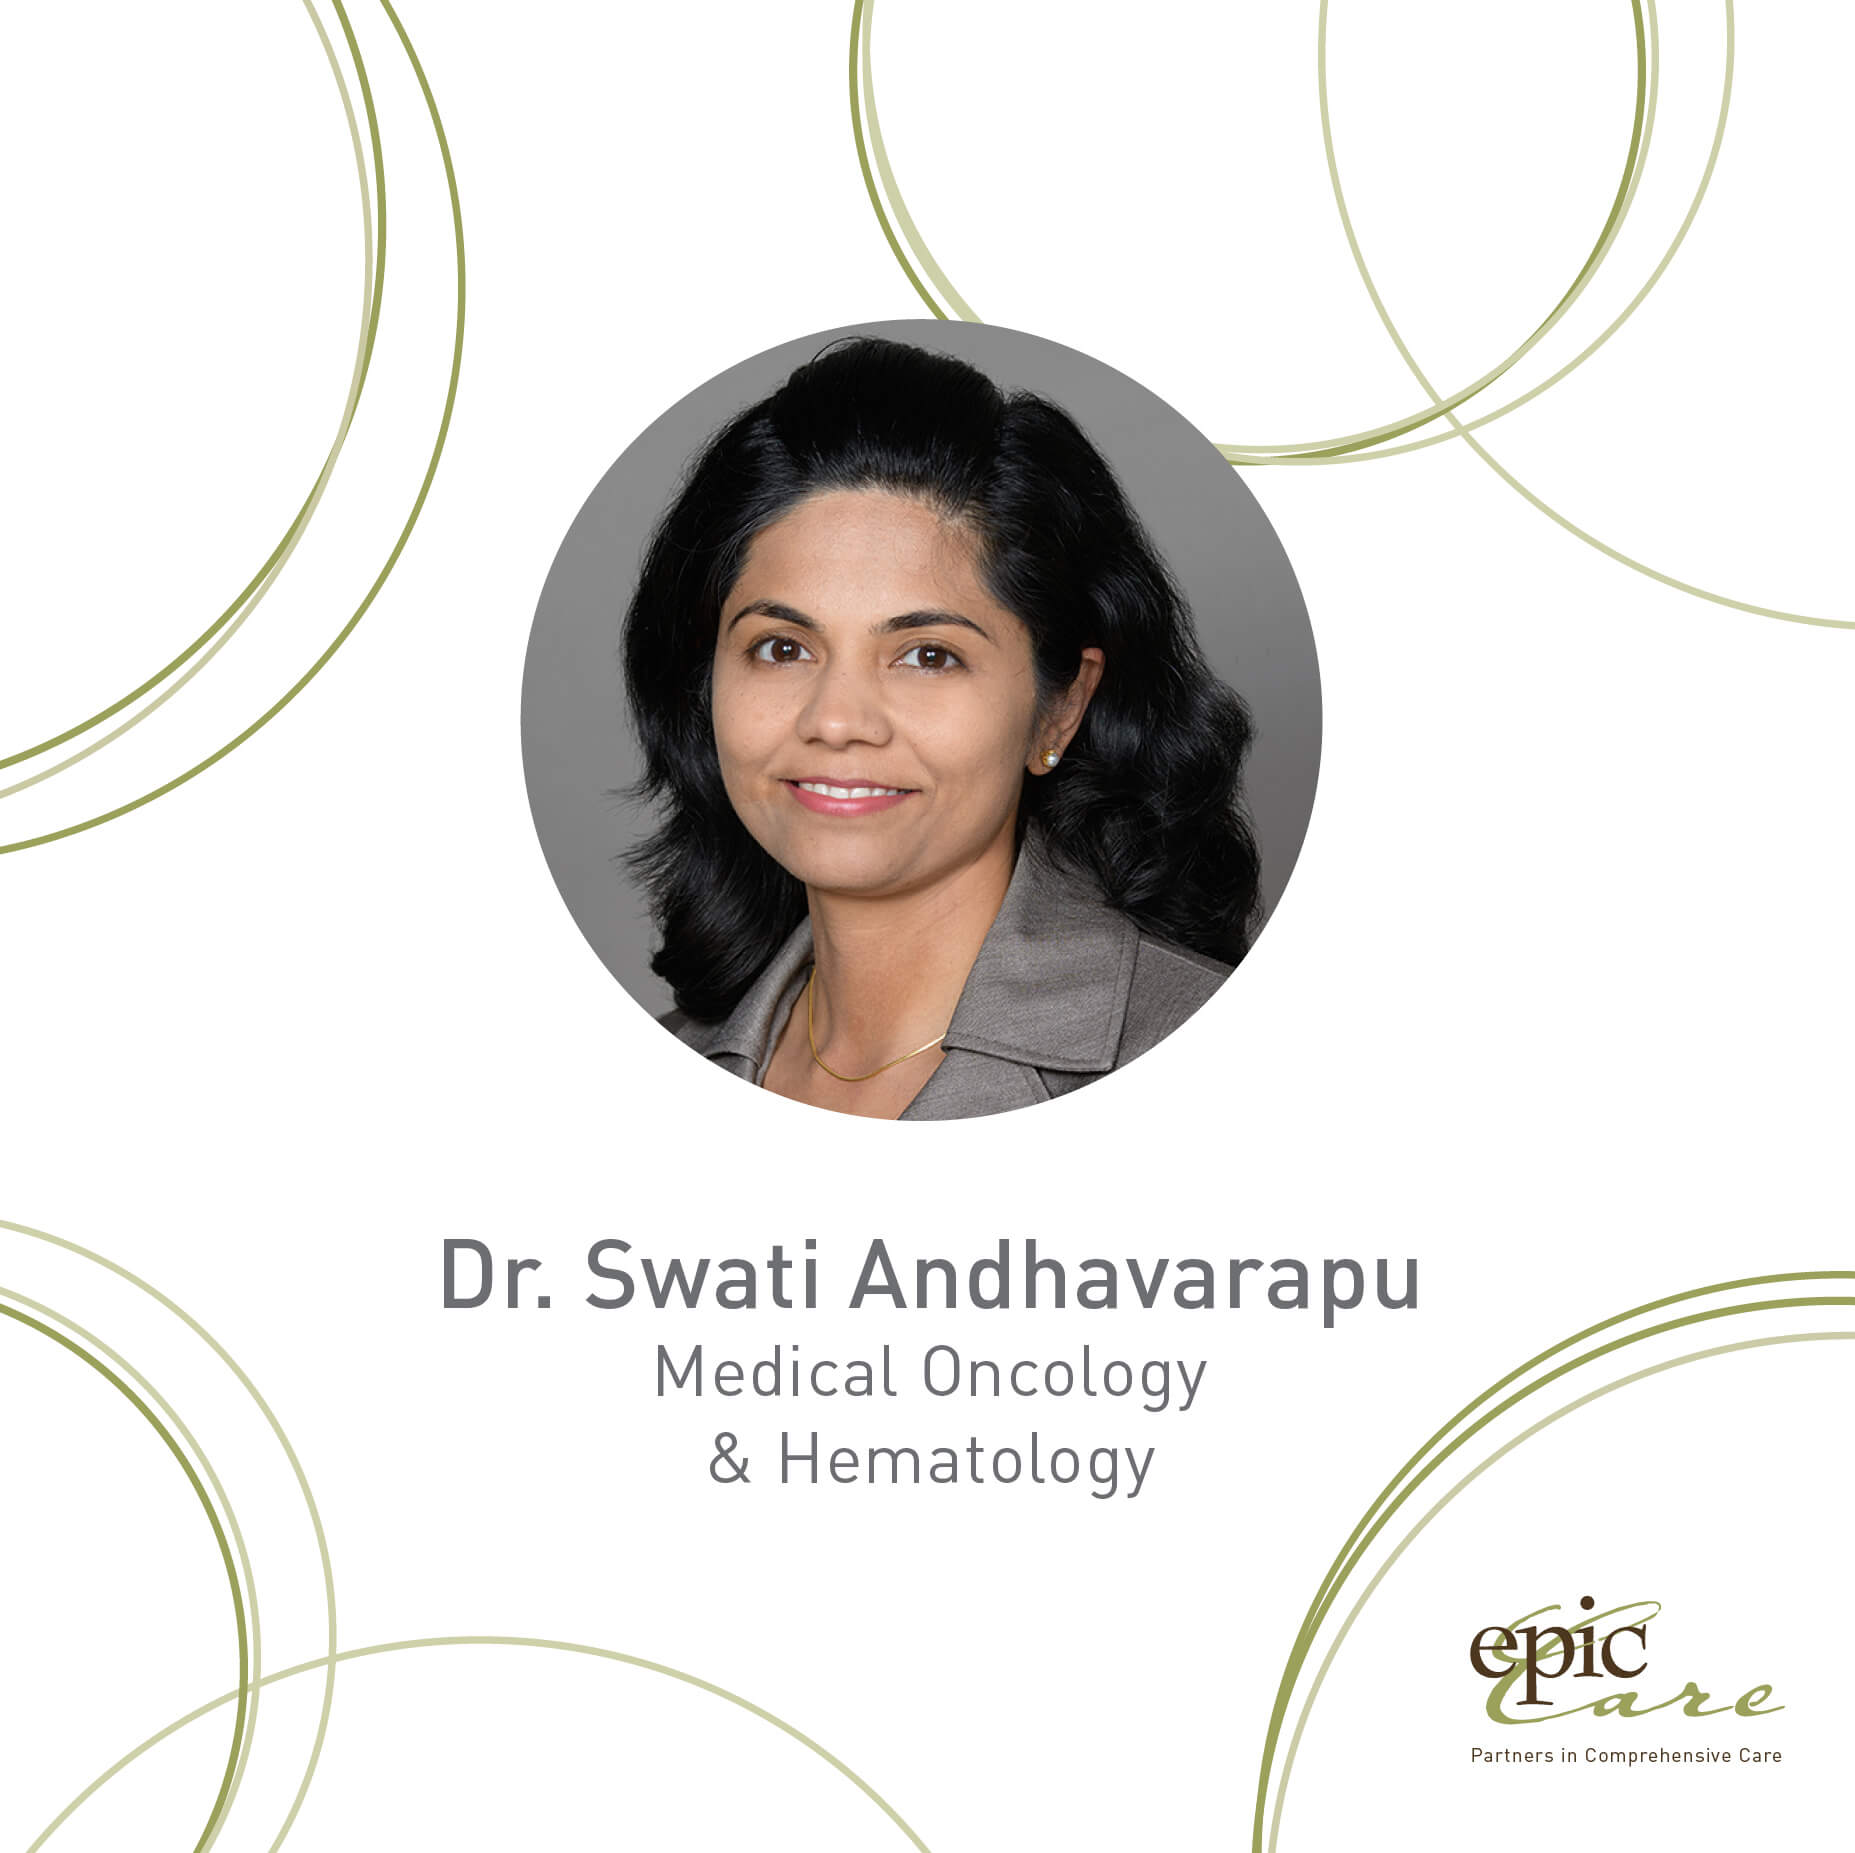 Welcome Dr. Swati Andhavarapu To The Epic Care Team!